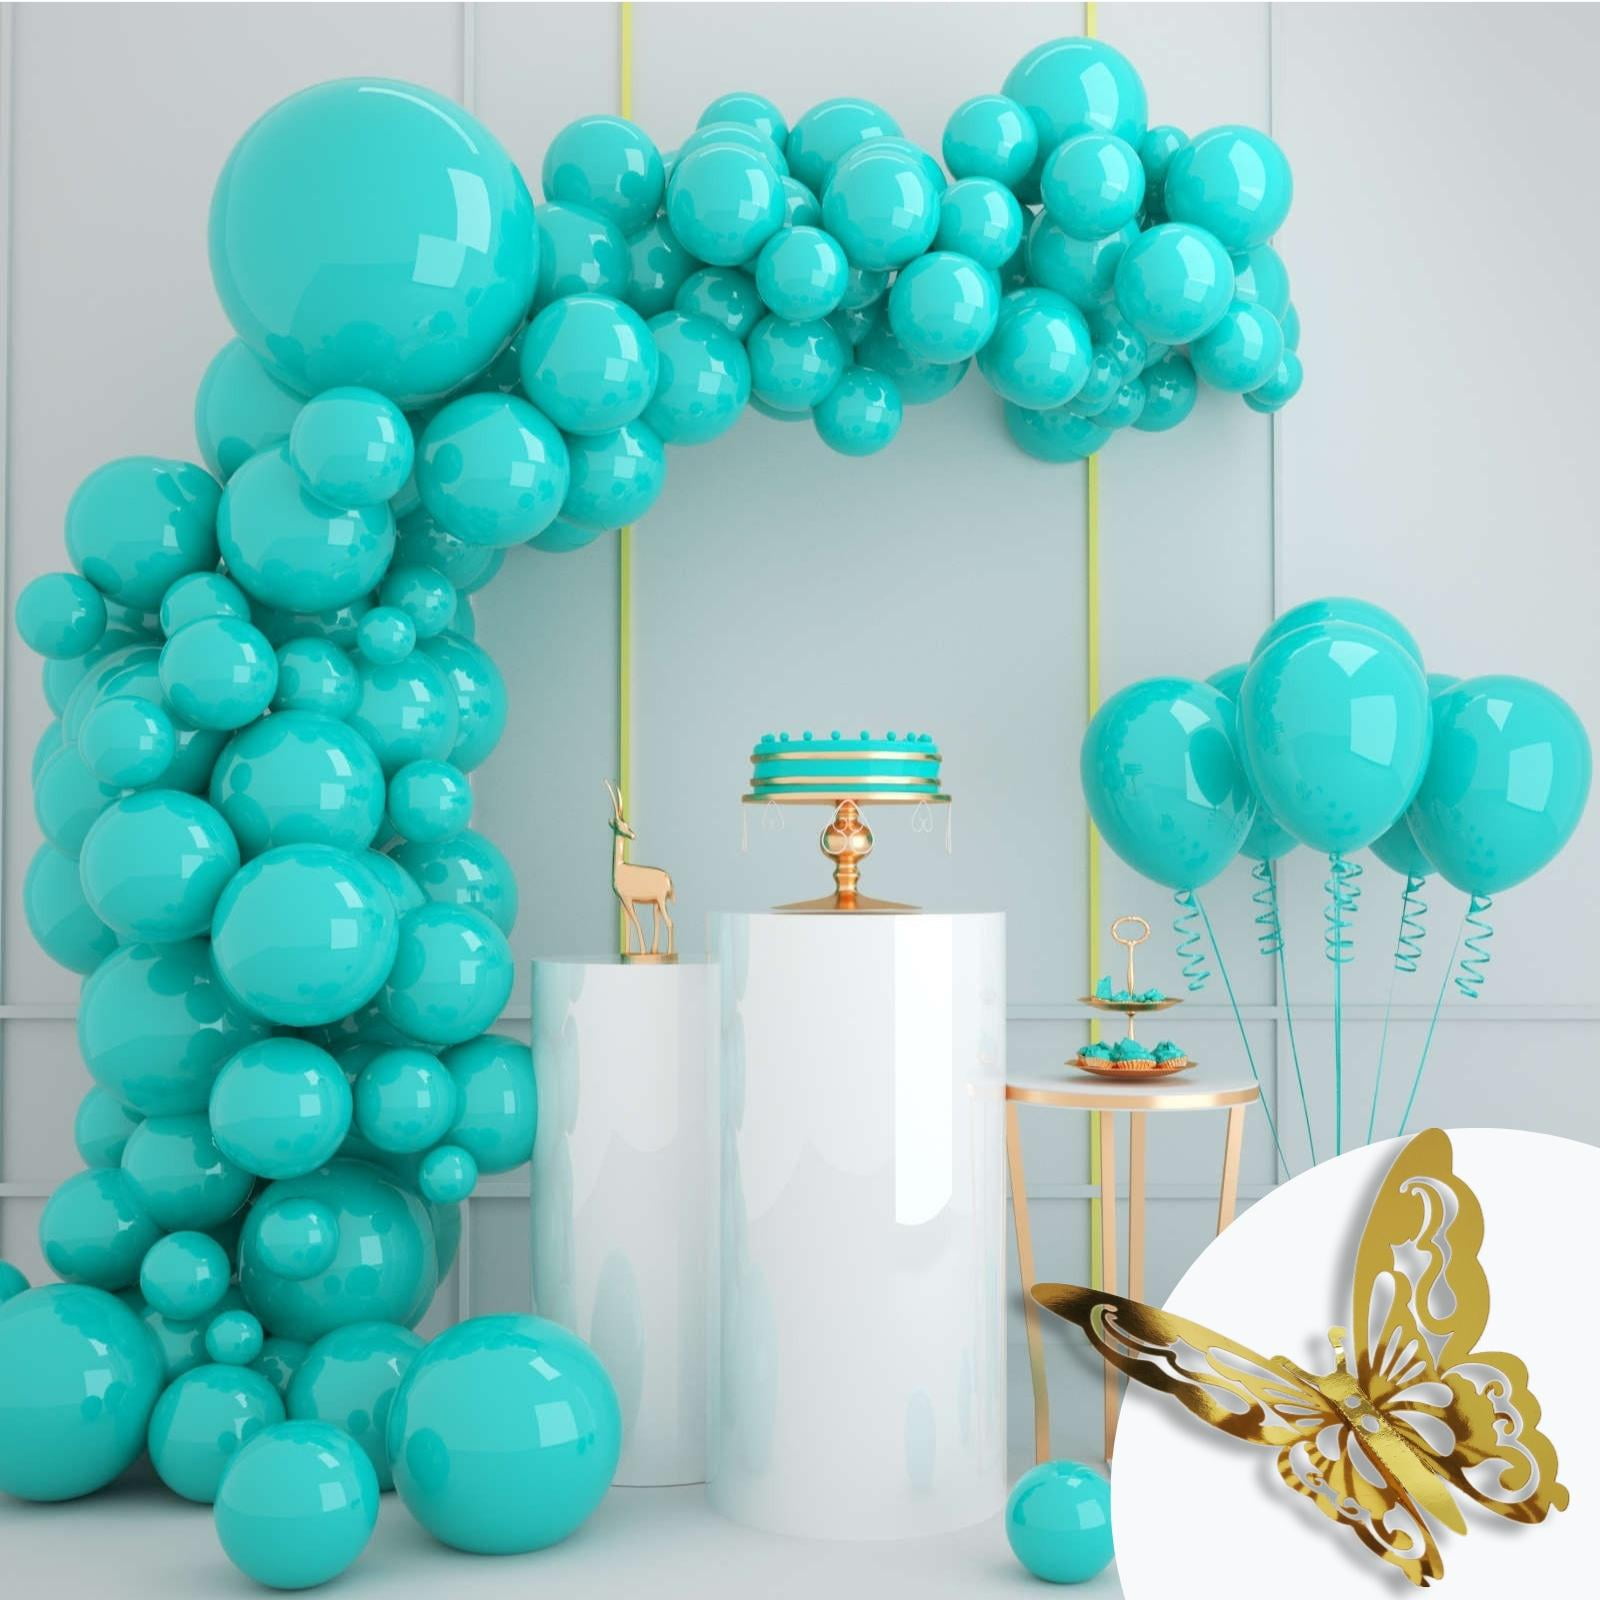 Visondeco White Balloon Garland Kit - 94pcs White Balloons with Gold  Butterflies; Different Sizes: 5, 12, and 18 White Balloon Arch for White  Party